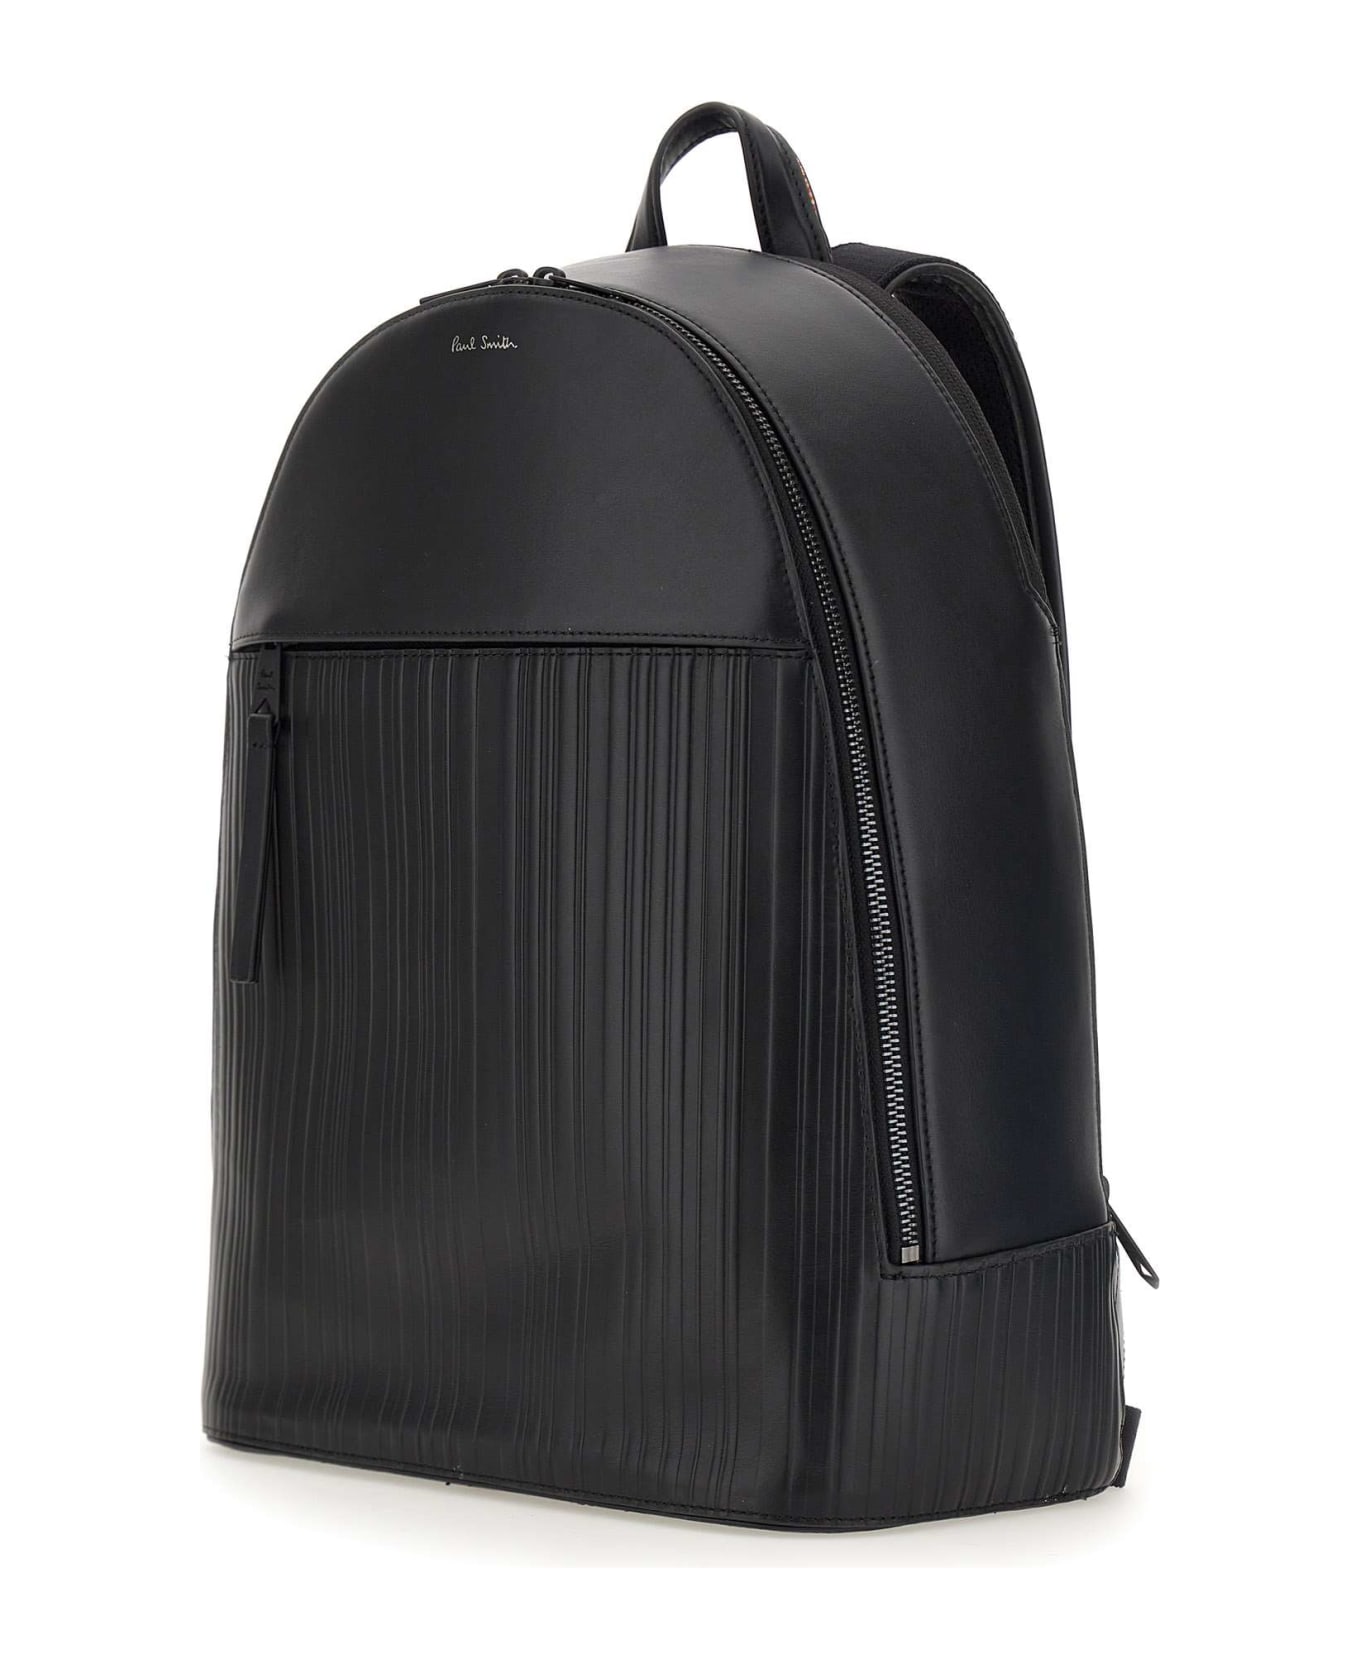 Paul Smith Leather Backpack - BLACK